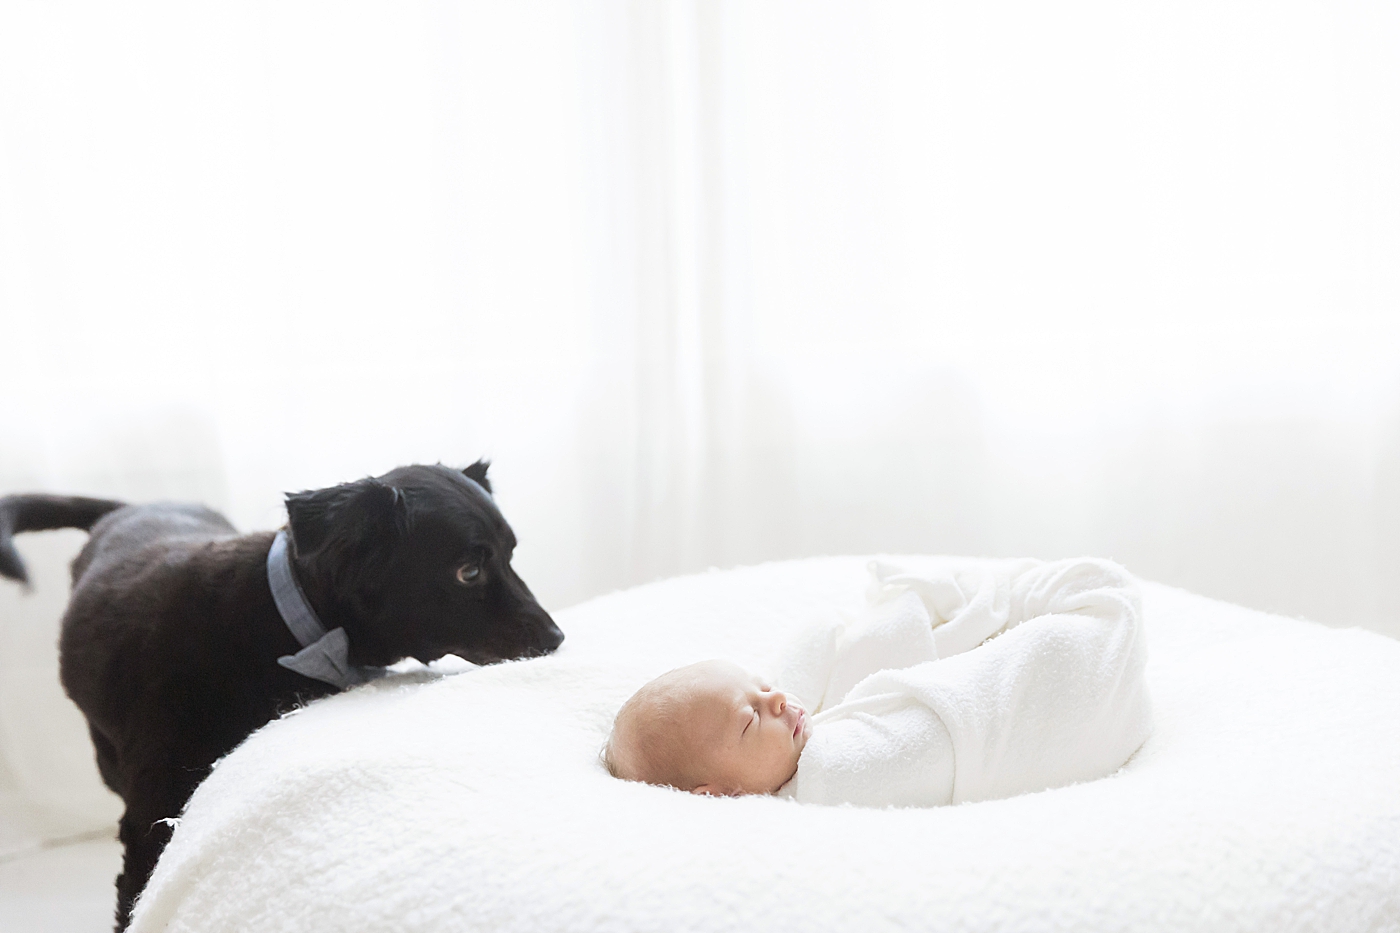 Dog looking over baby during newborn session. Photo by Fresh Light Photography.